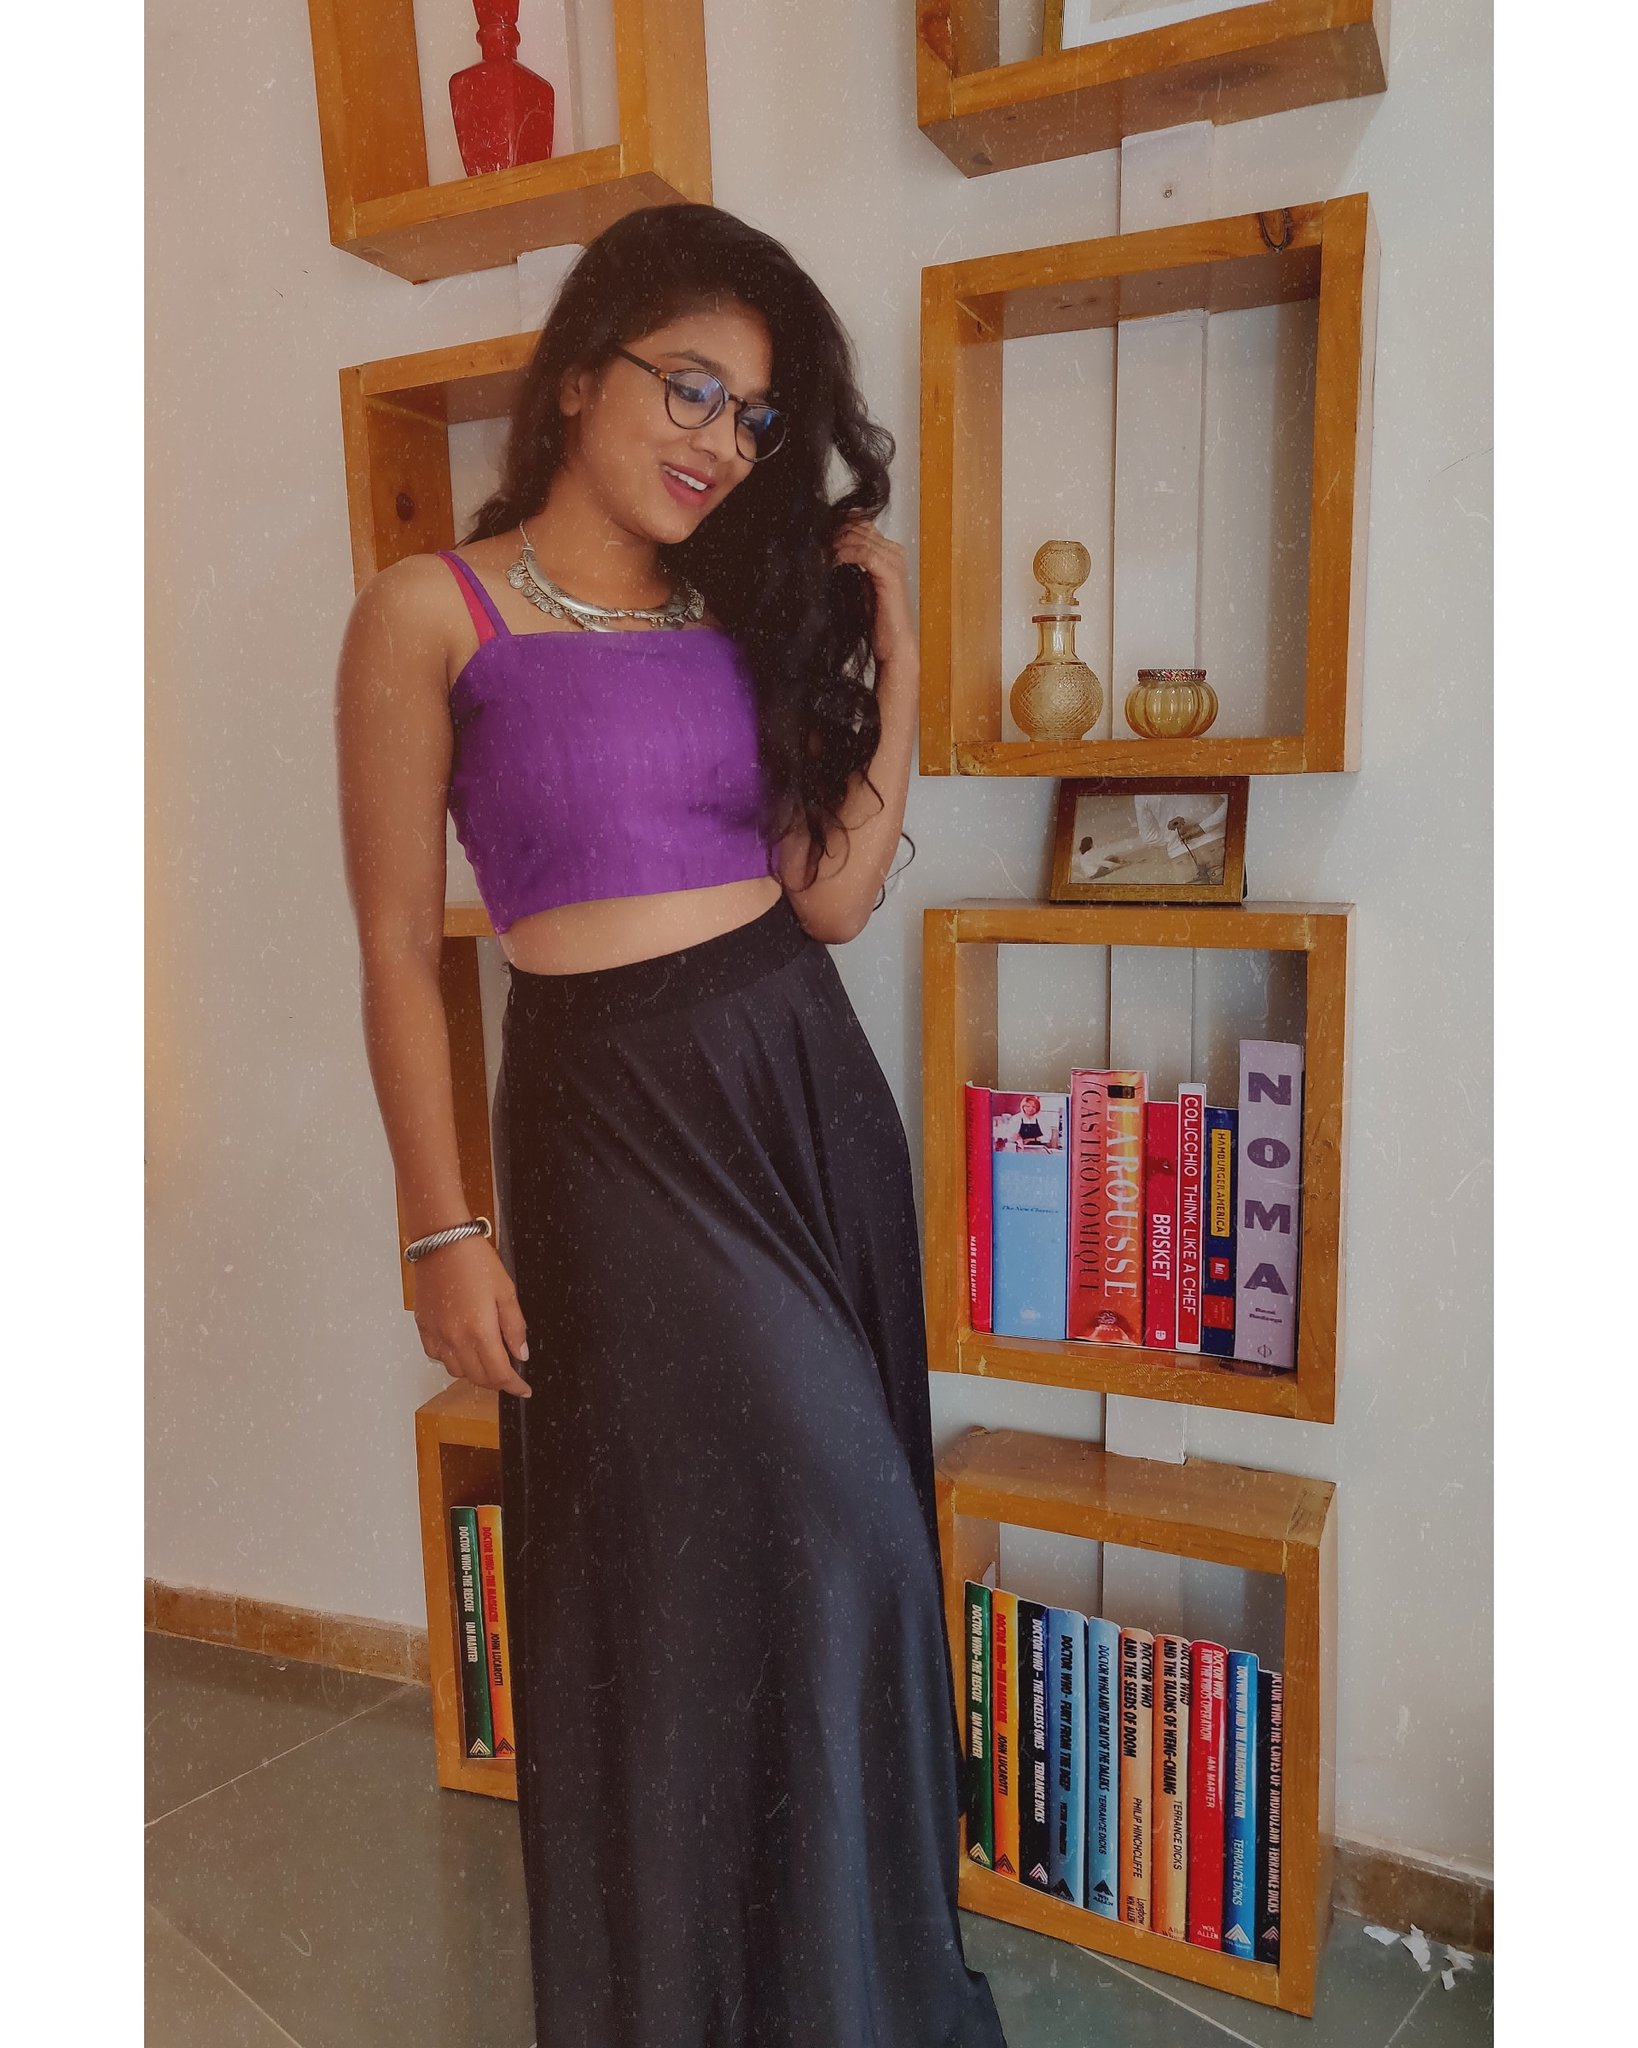 Vj parvathy hot video in tight fit dress getting viral